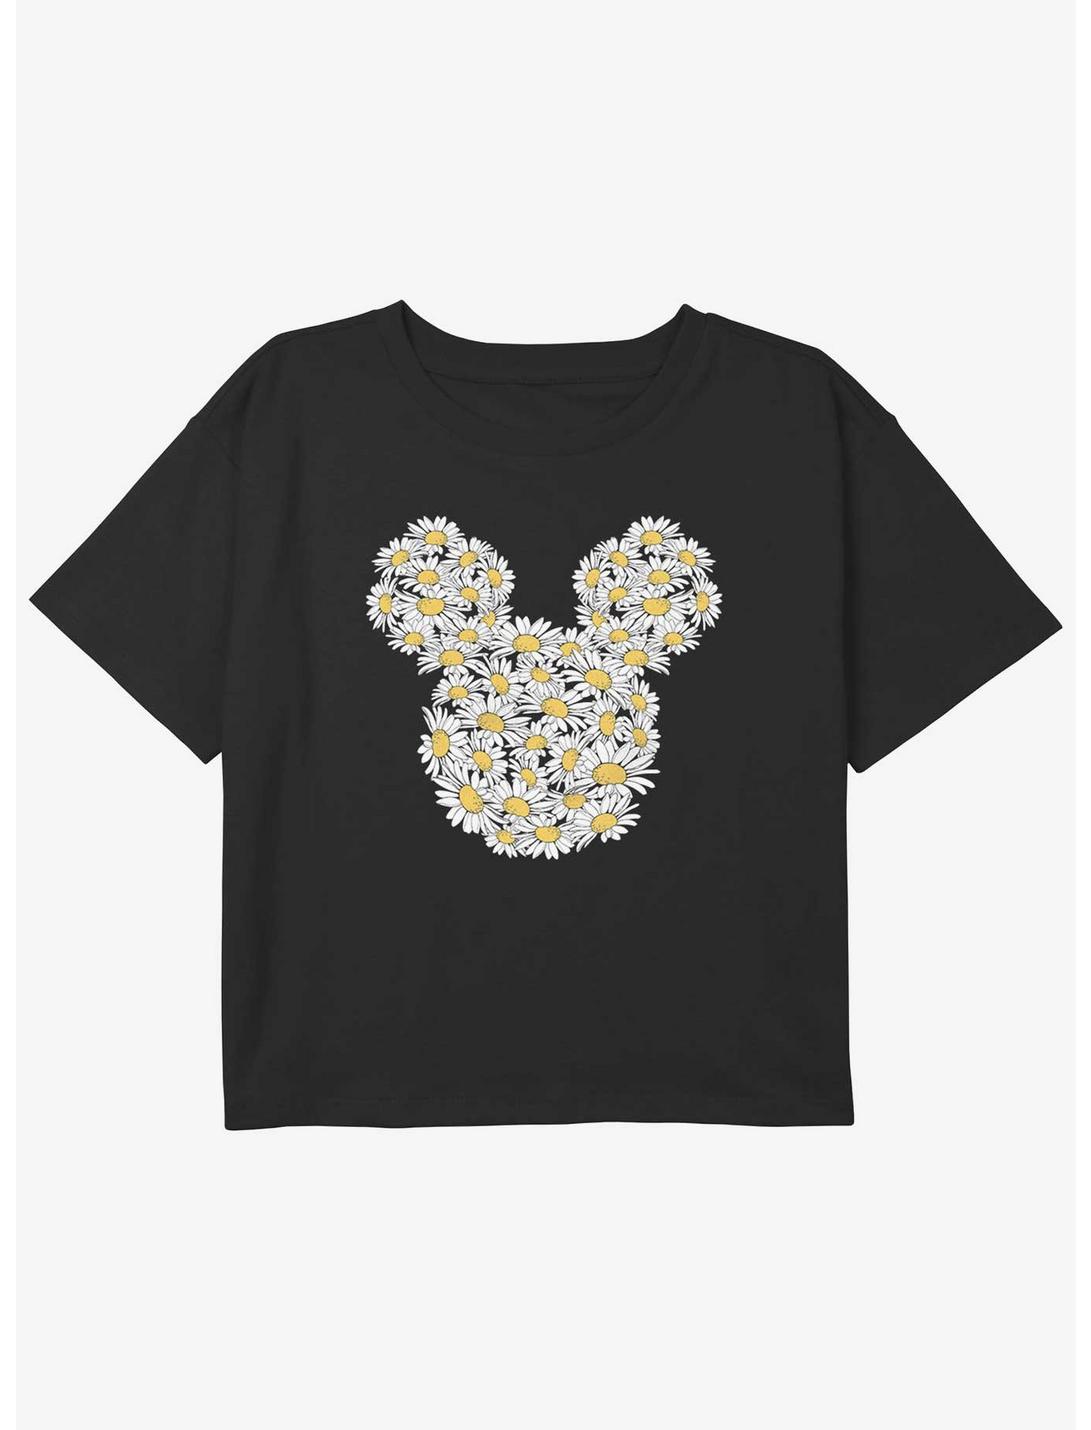 Disney Mickey Mouse Daisy Ears Girls Youth Crop T-Shirt, BLACK, hi-res